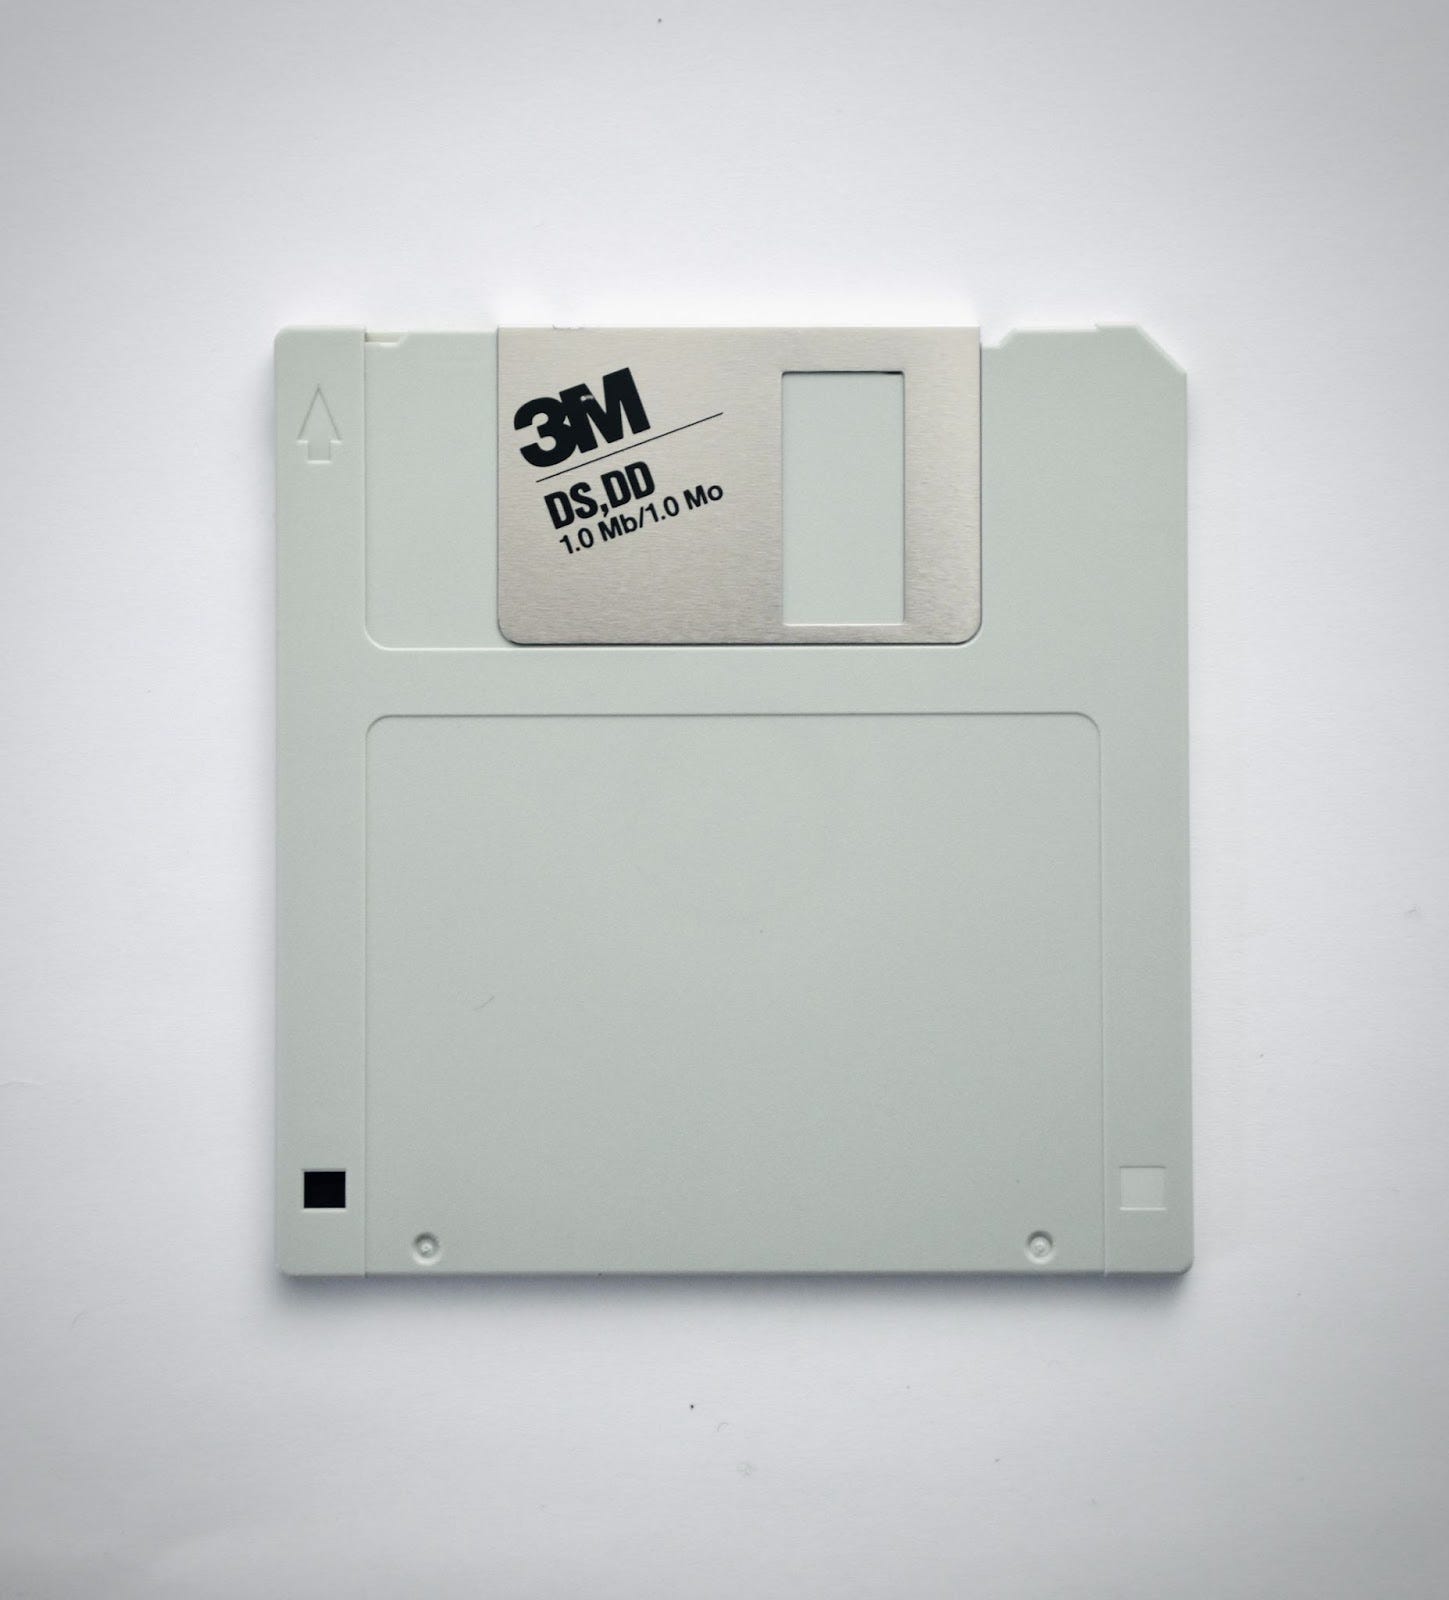 Photo of an old, grey 3.5 inch floppy disk with a 3M logo on it.